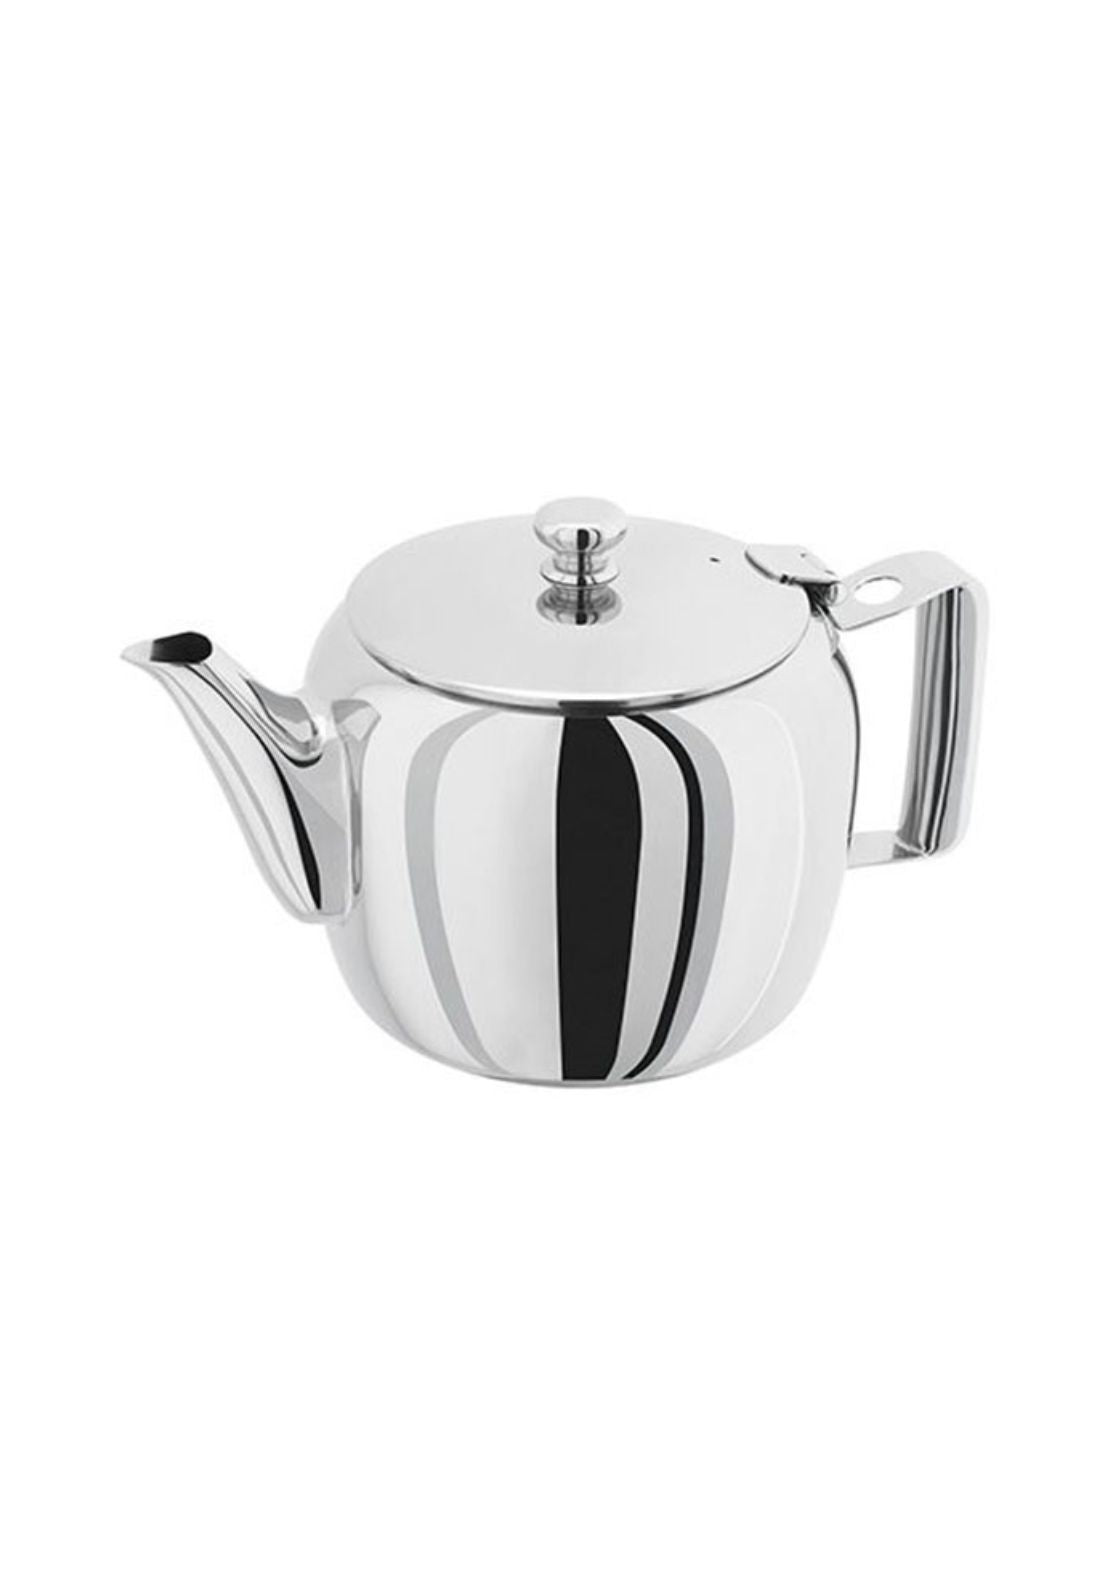 Stellar Traditional 4 Cup Teapot 900ML | St07 1 Shaws Department Stores